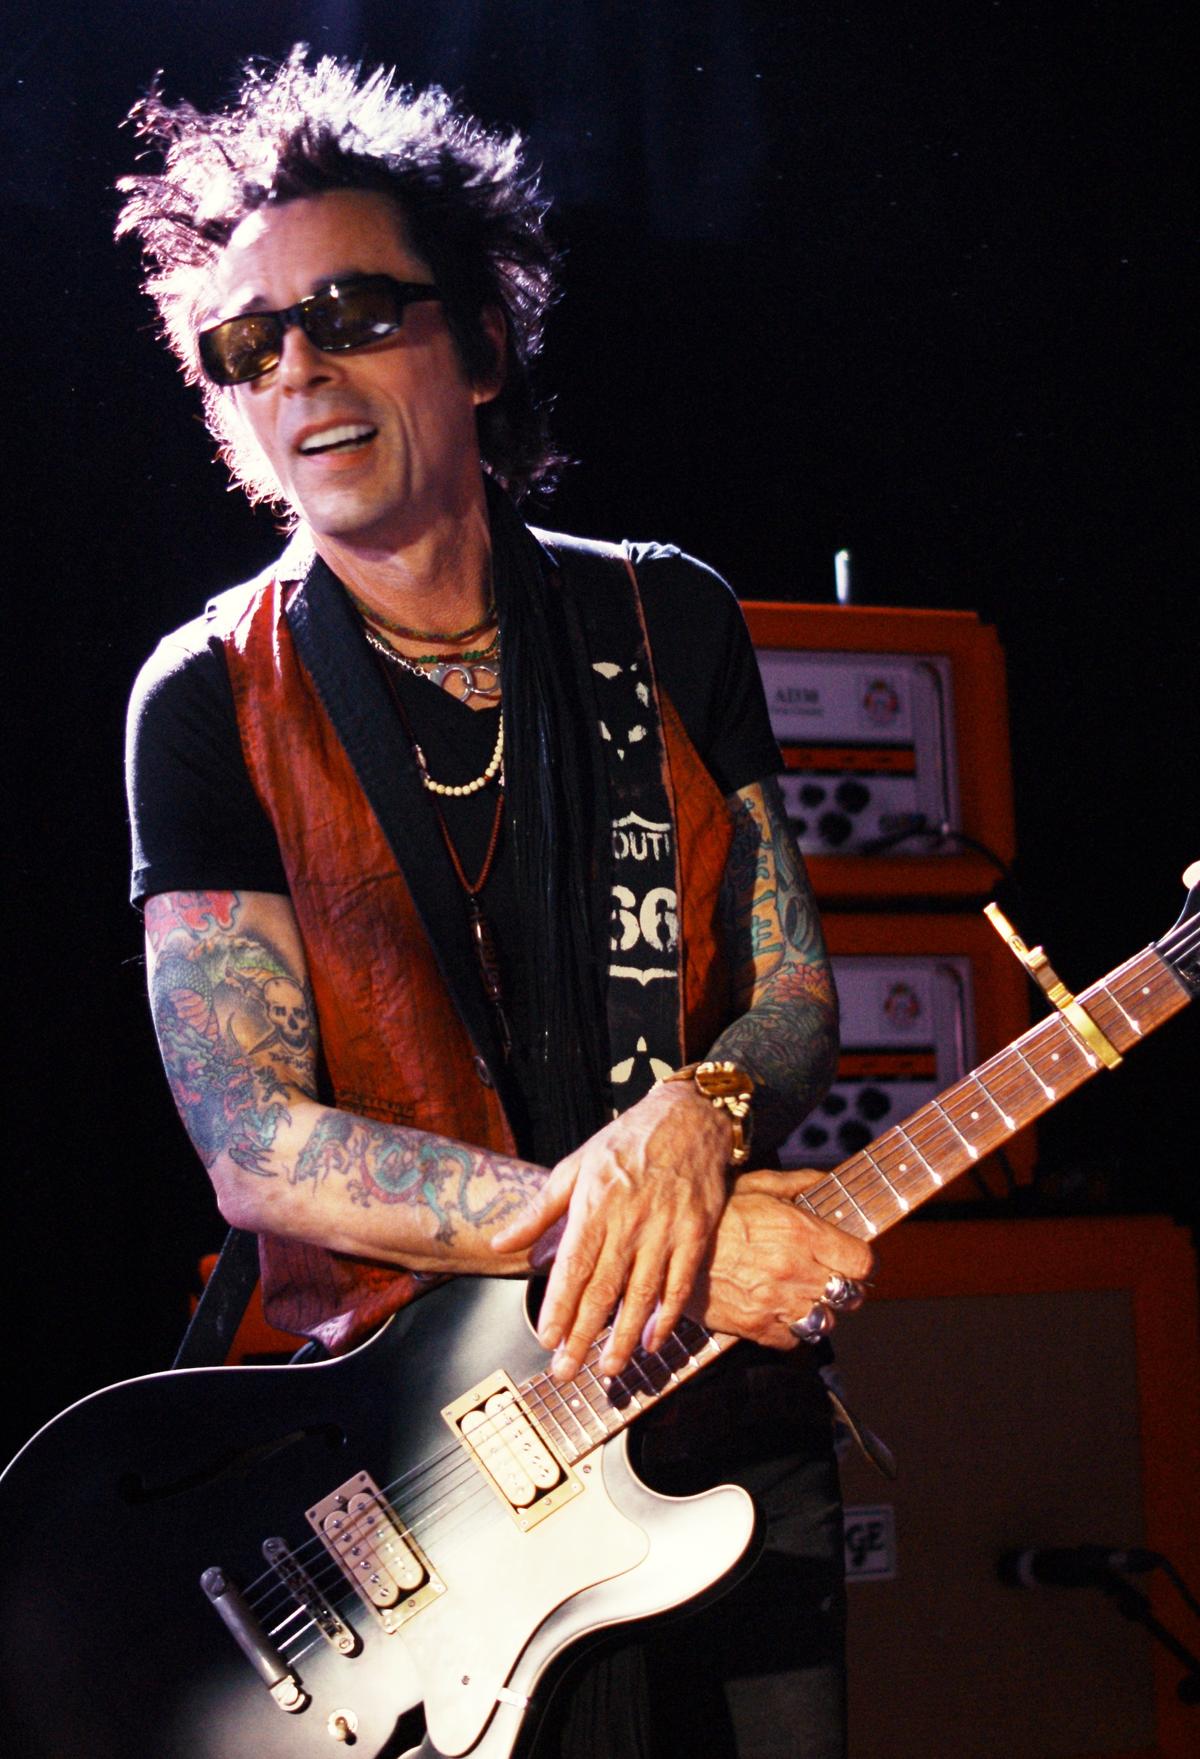 Earl Slick playing with The New York Dolls at Club Academy in Manchester, England, on 29 March 2011. (Creative Commons/Flickr/Man Alive)